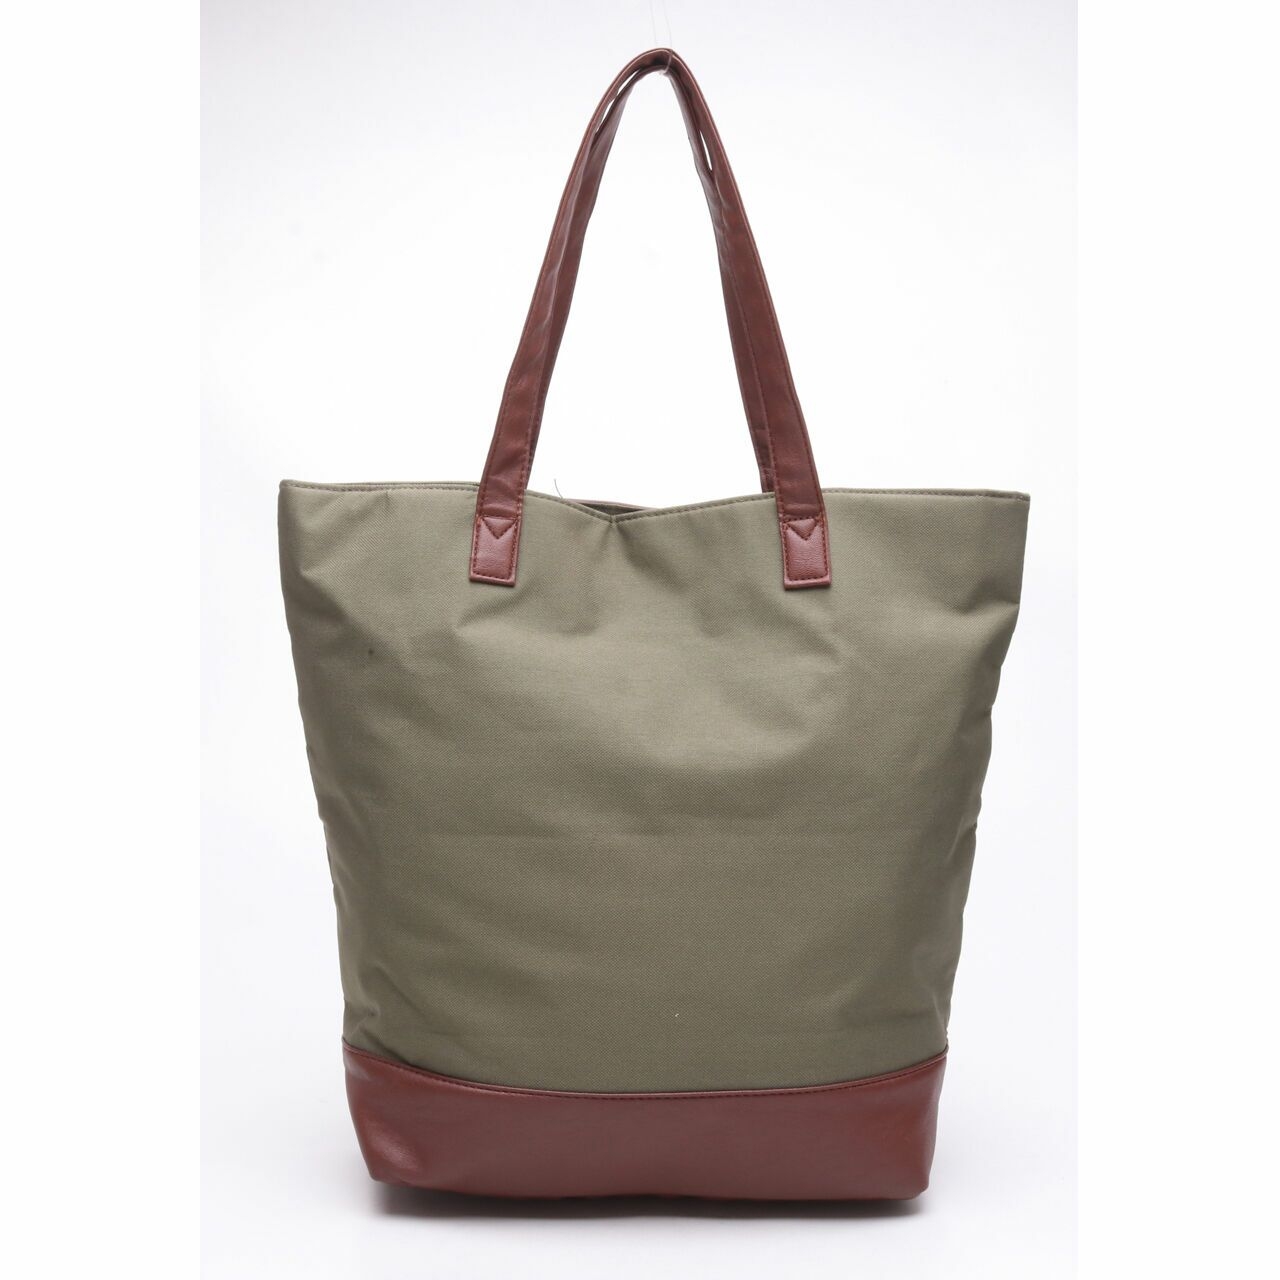 The Little Things She Needs Brown & Army Tote Bag